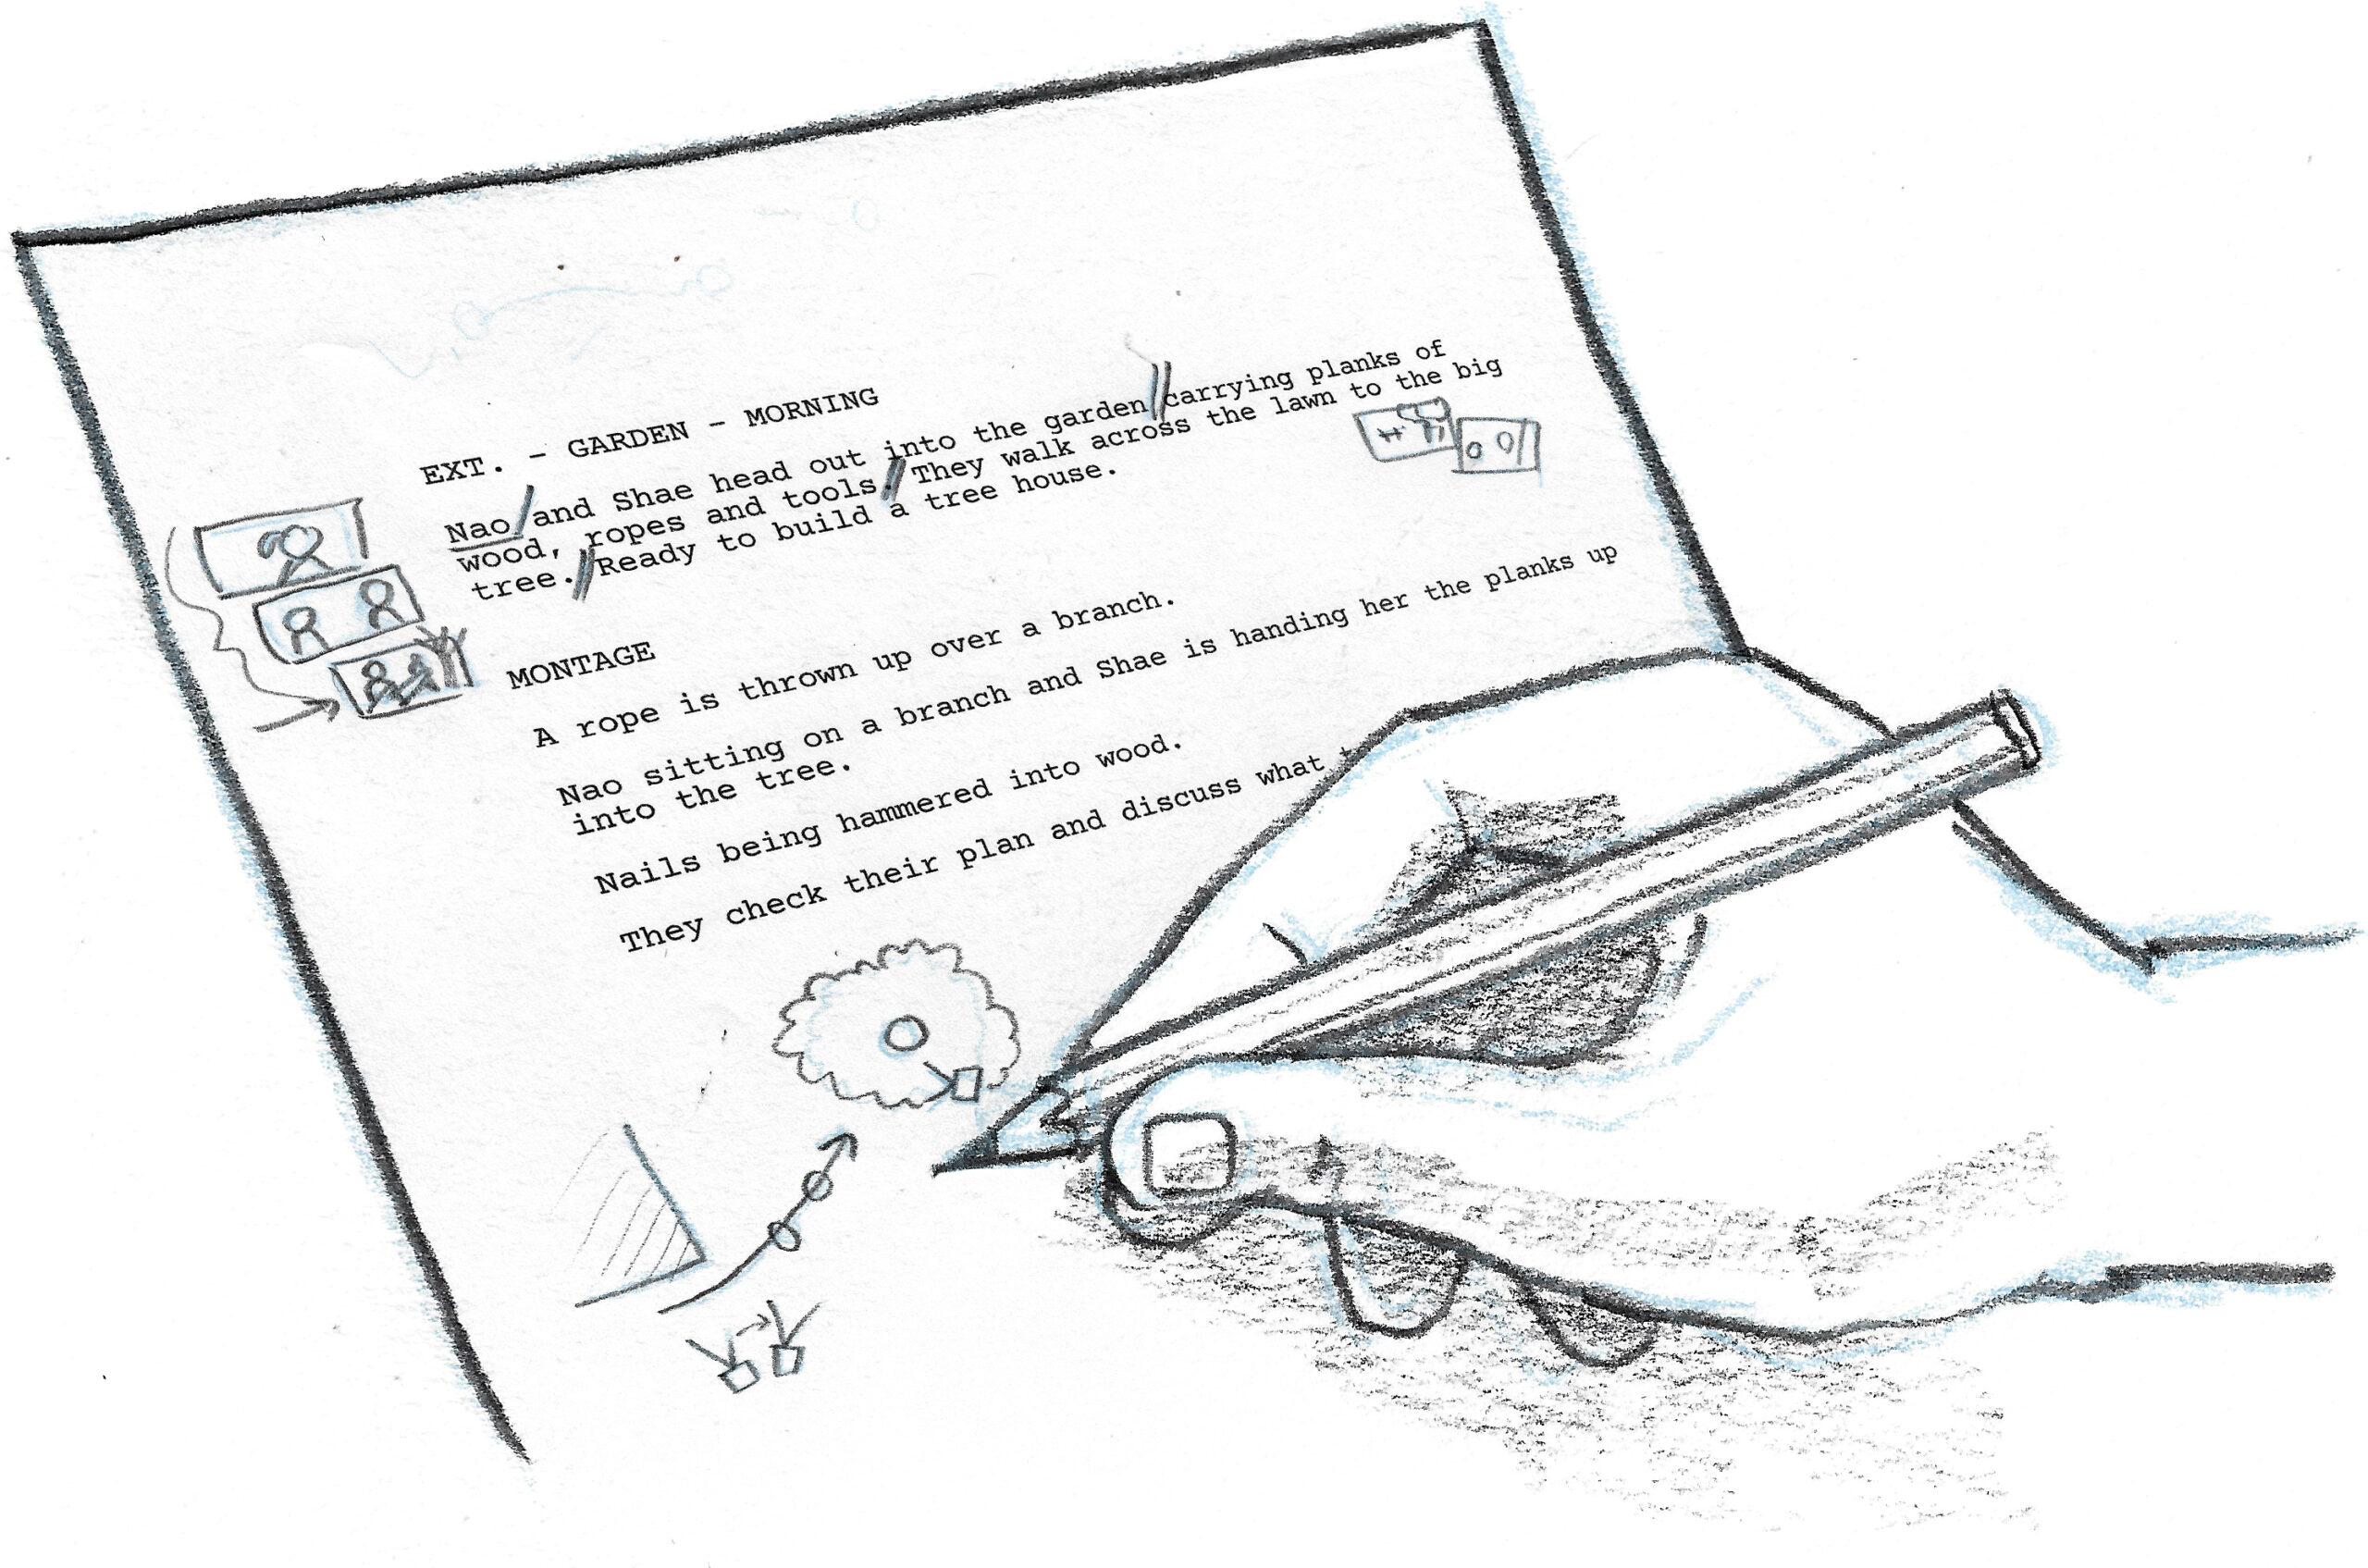 Thumbnails on the script pages